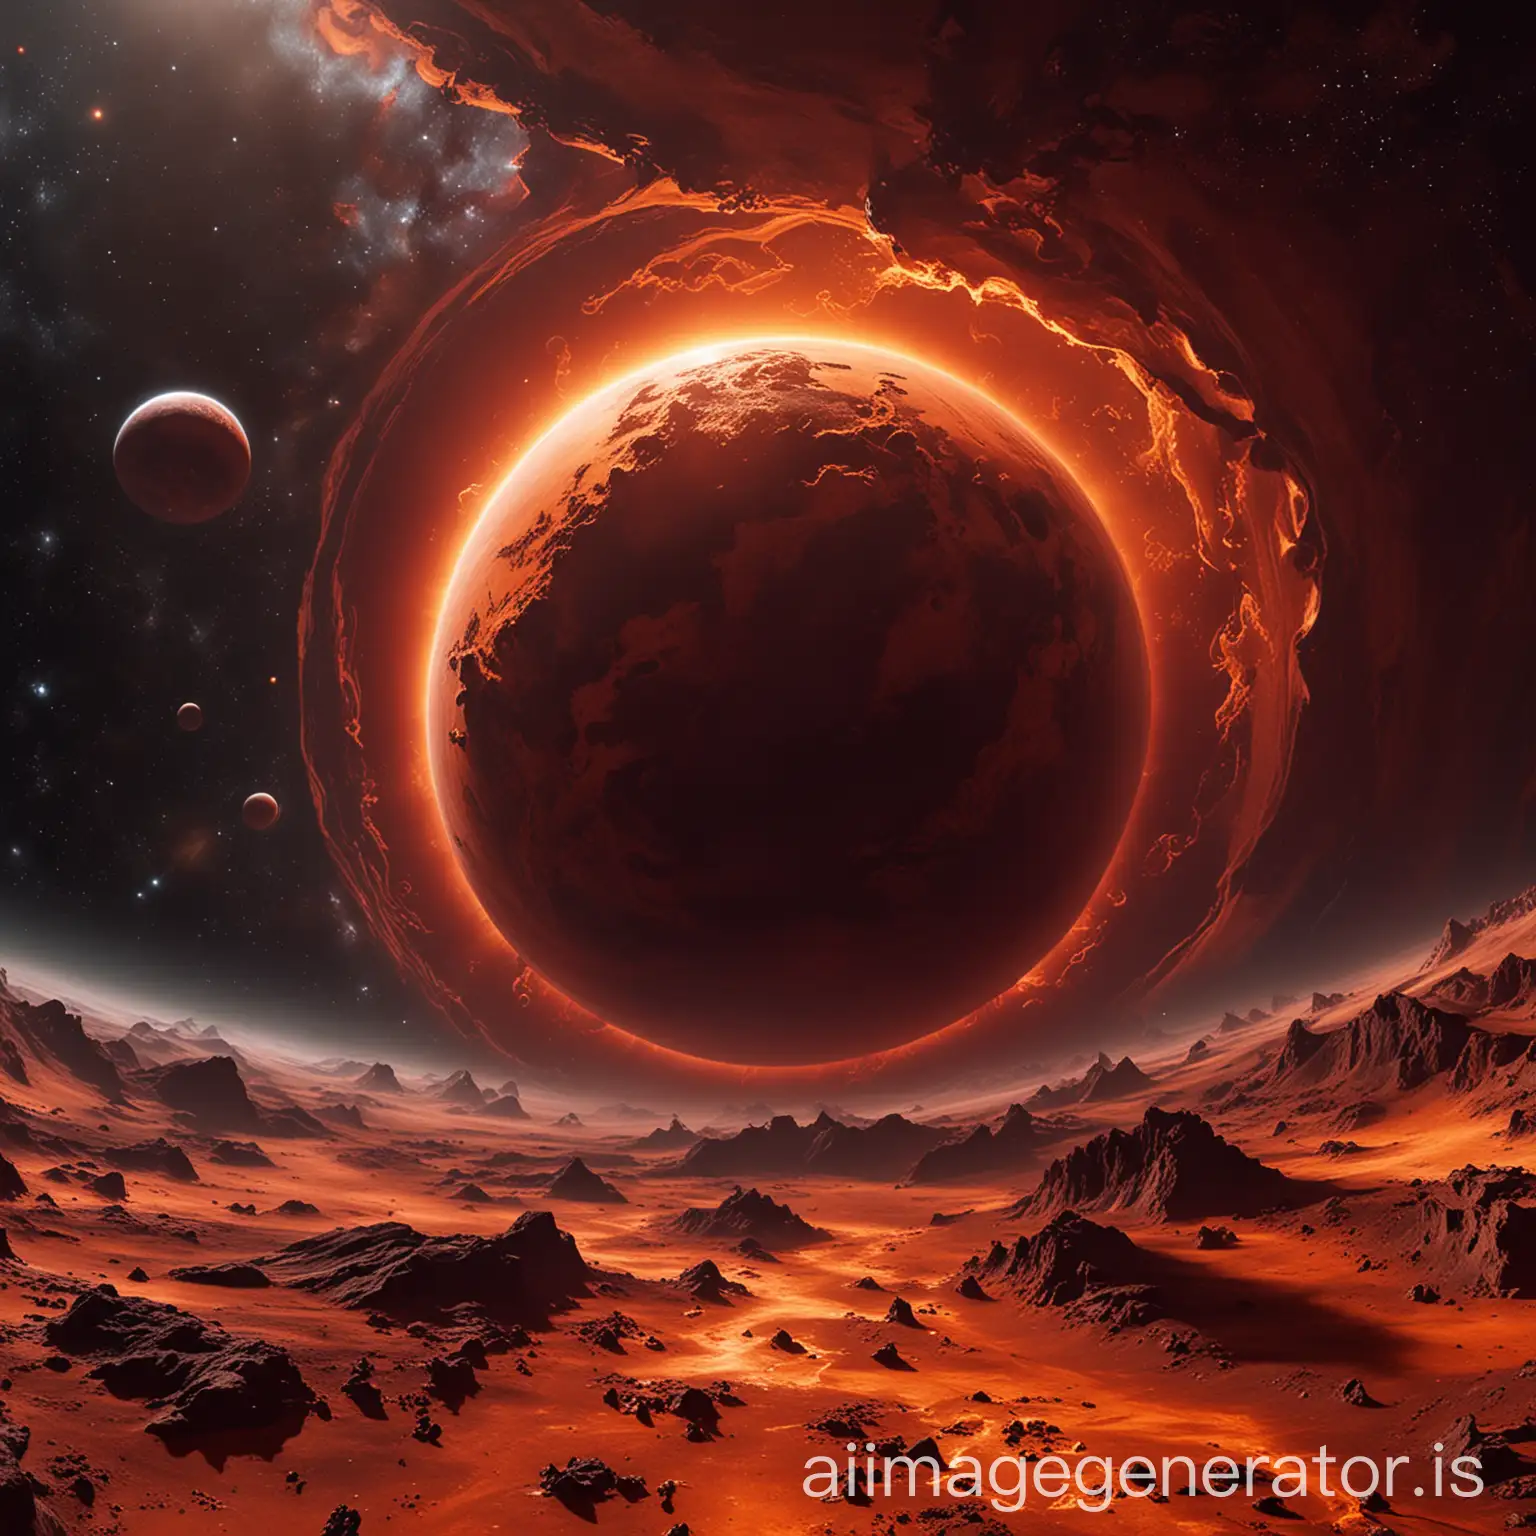 an overlook of a planet in space with Orange crust, Red flowing water, an Atmosphere similar to Earth's and a Faint Ring system